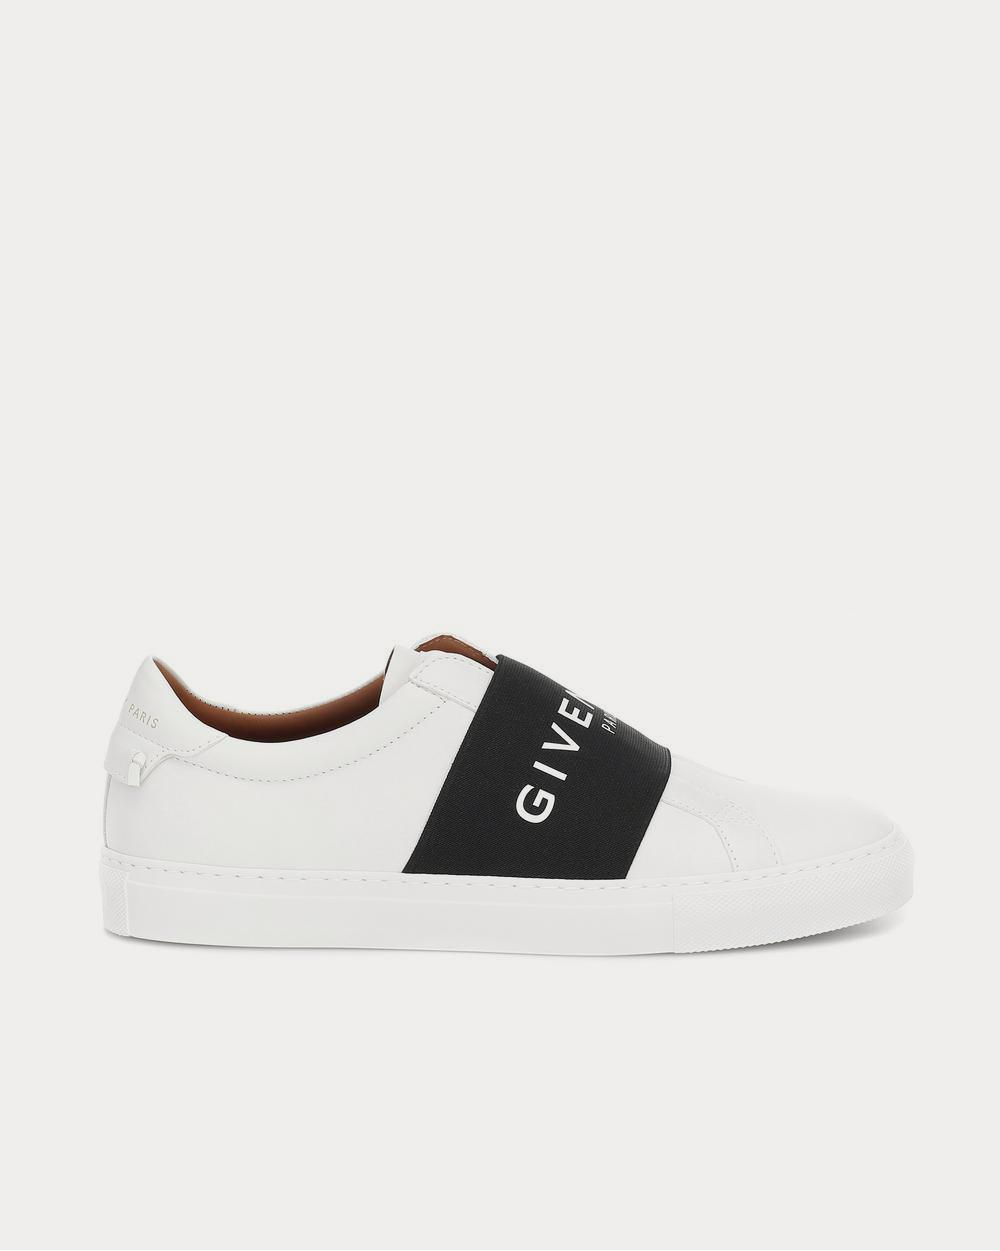 Givenchy - Urban Street leather White Low Top Sneakers